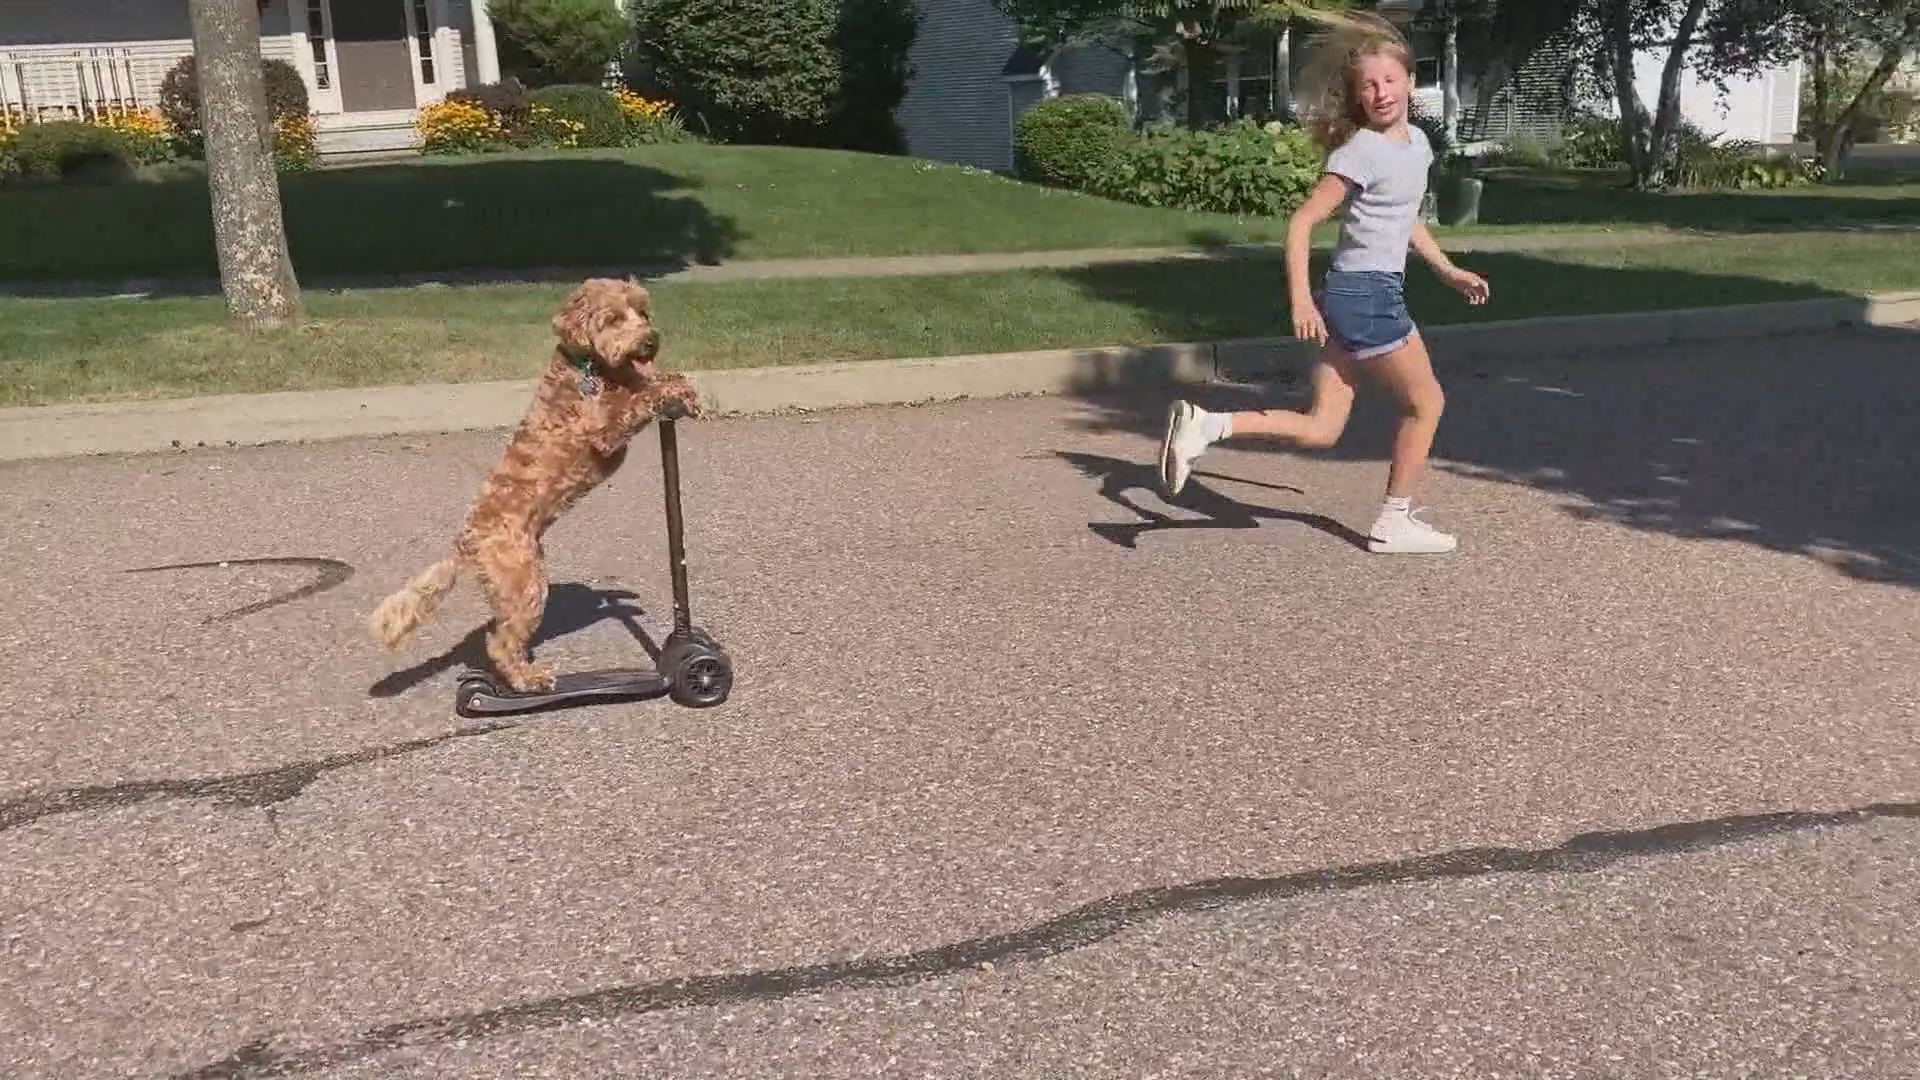 It's not unusual to see residents riding scooters in this Vermont neighborhood. But this resident has fur and four legs. Meet Lola the labradoodle.